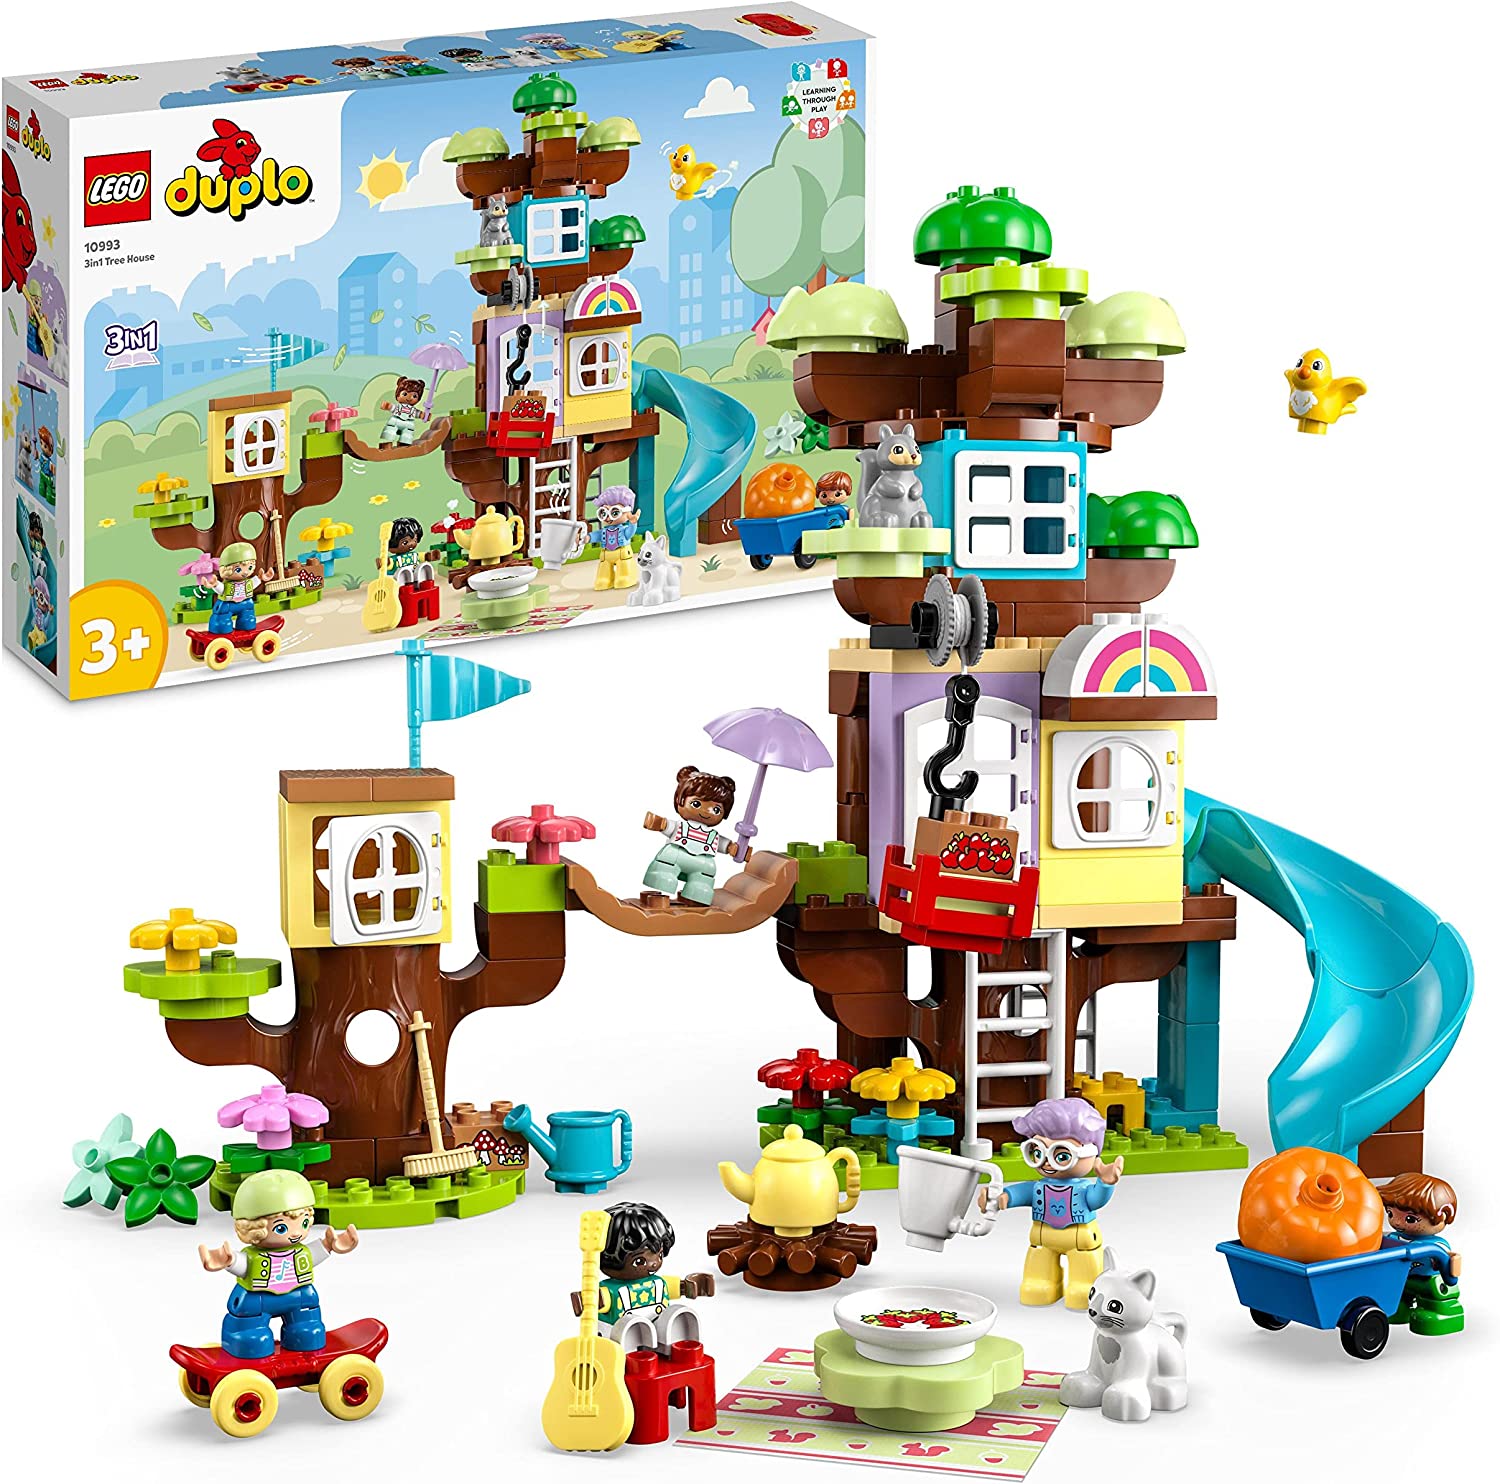 LEGO 10993 Duplo 3-in-1 Tree House Toy for Toddlers from 3 Years, Girls and Boys with 4 Figures, Animals, Construction Toy with Building Blocks and a Slide, Educational Toy